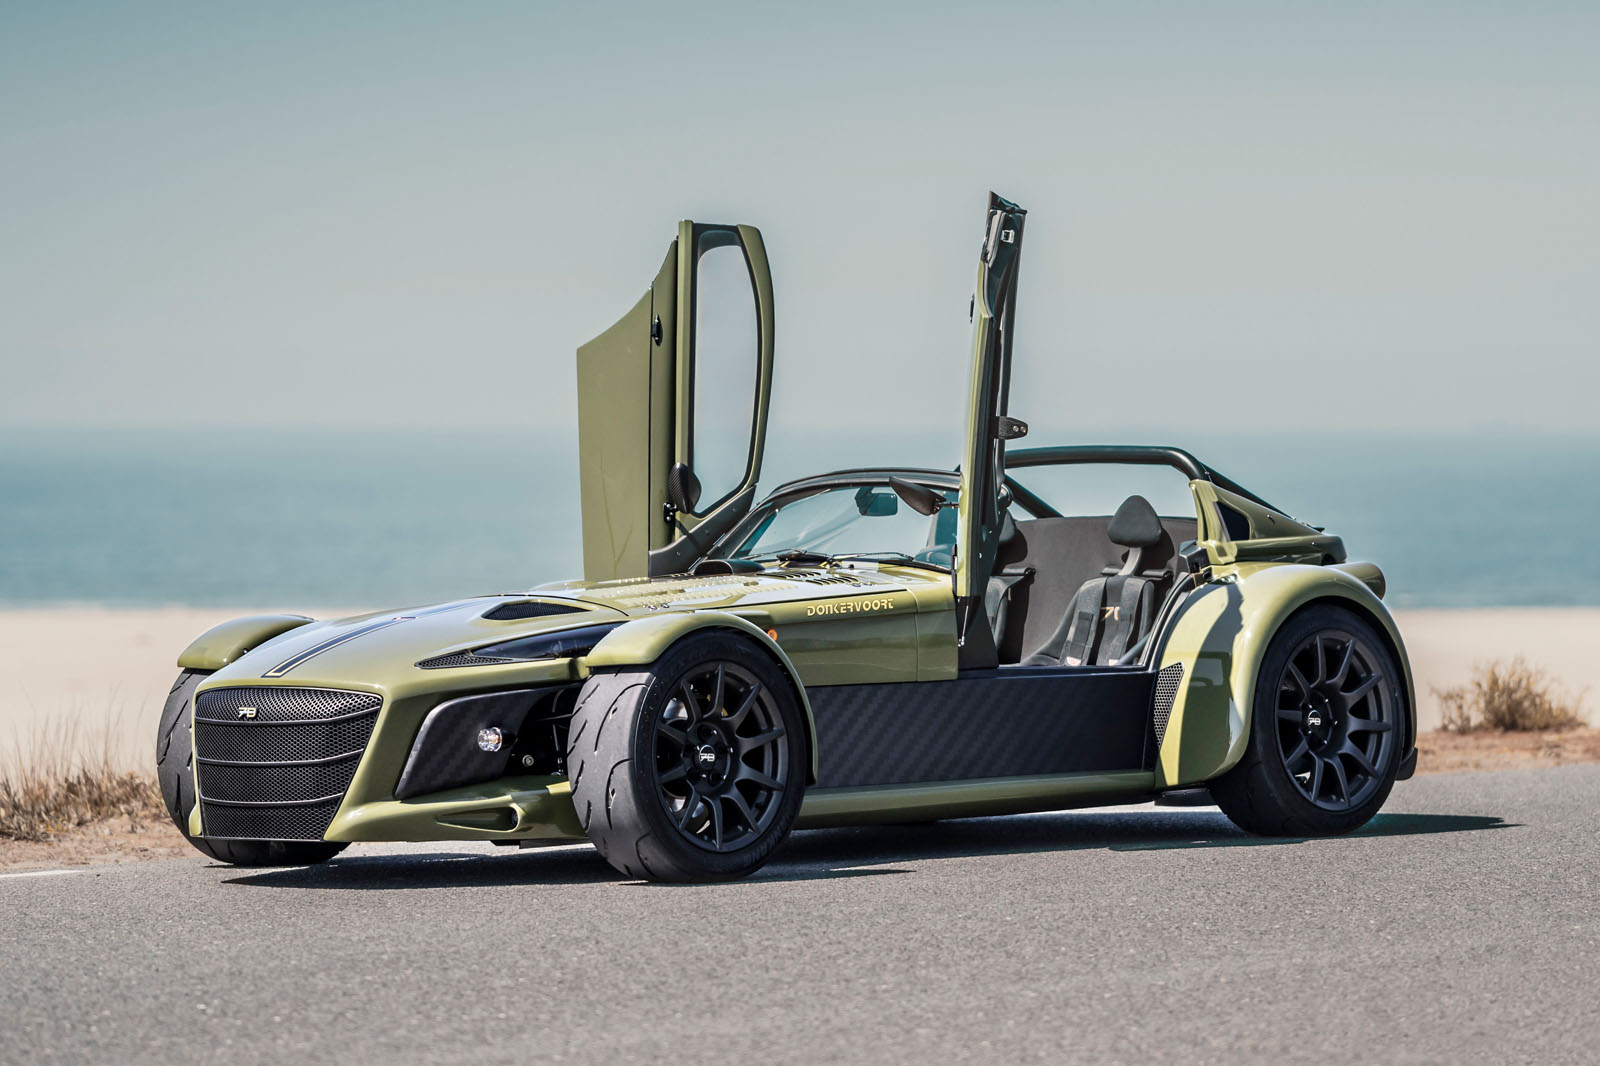 donkervoort-d8-gto-jd70-revealed-as-415bhp-680kg-road-car-autocar